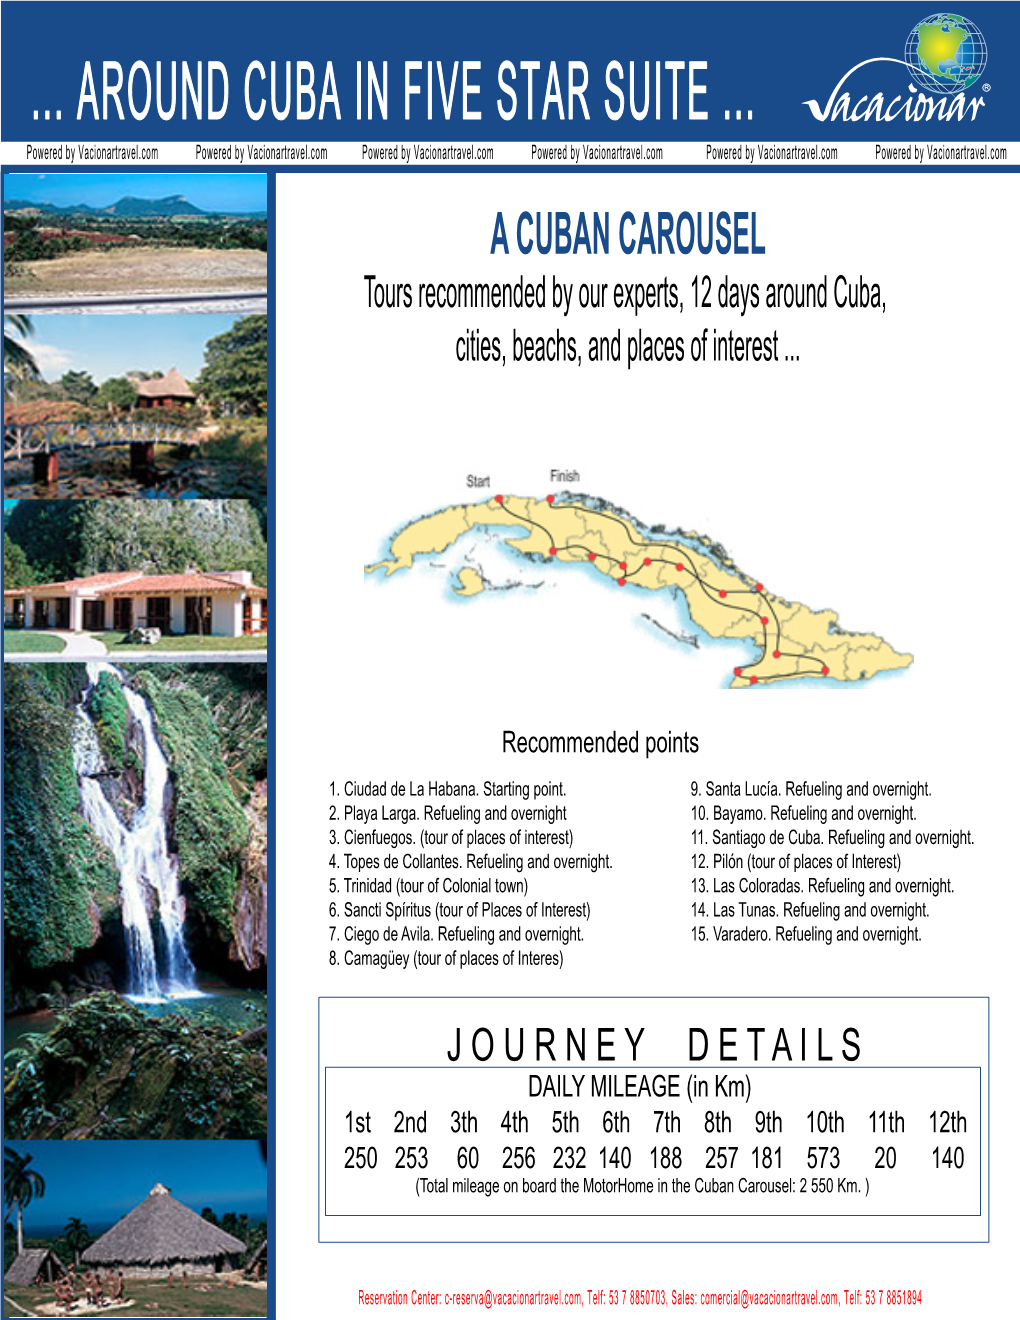 A CUBAN CAROUSEL Tours Recommended by Our Experts, 12 Days Around Cuba, Cities, Beachs, and Places of Interest